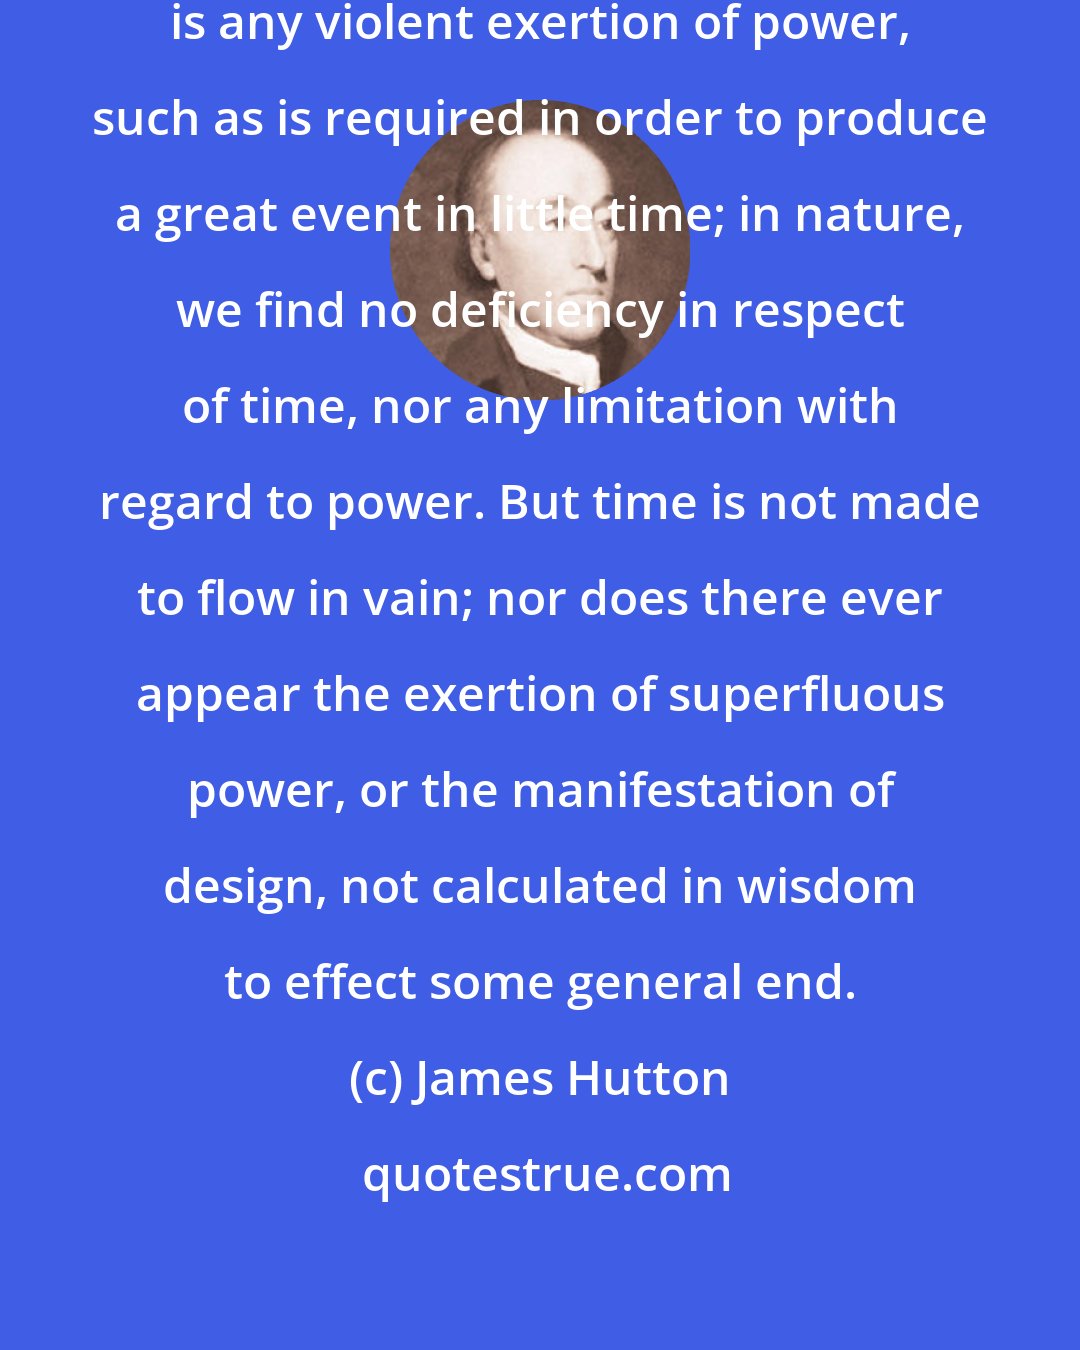 James Hutton: We are not to suppose, that there is any violent exertion of power, such as is required in order to produce a great event in little time; in nature, we find no deficiency in respect of time, nor any limitation with regard to power. But time is not made to flow in vain; nor does there ever appear the exertion of superfluous power, or the manifestation of design, not calculated in wisdom to effect some general end.